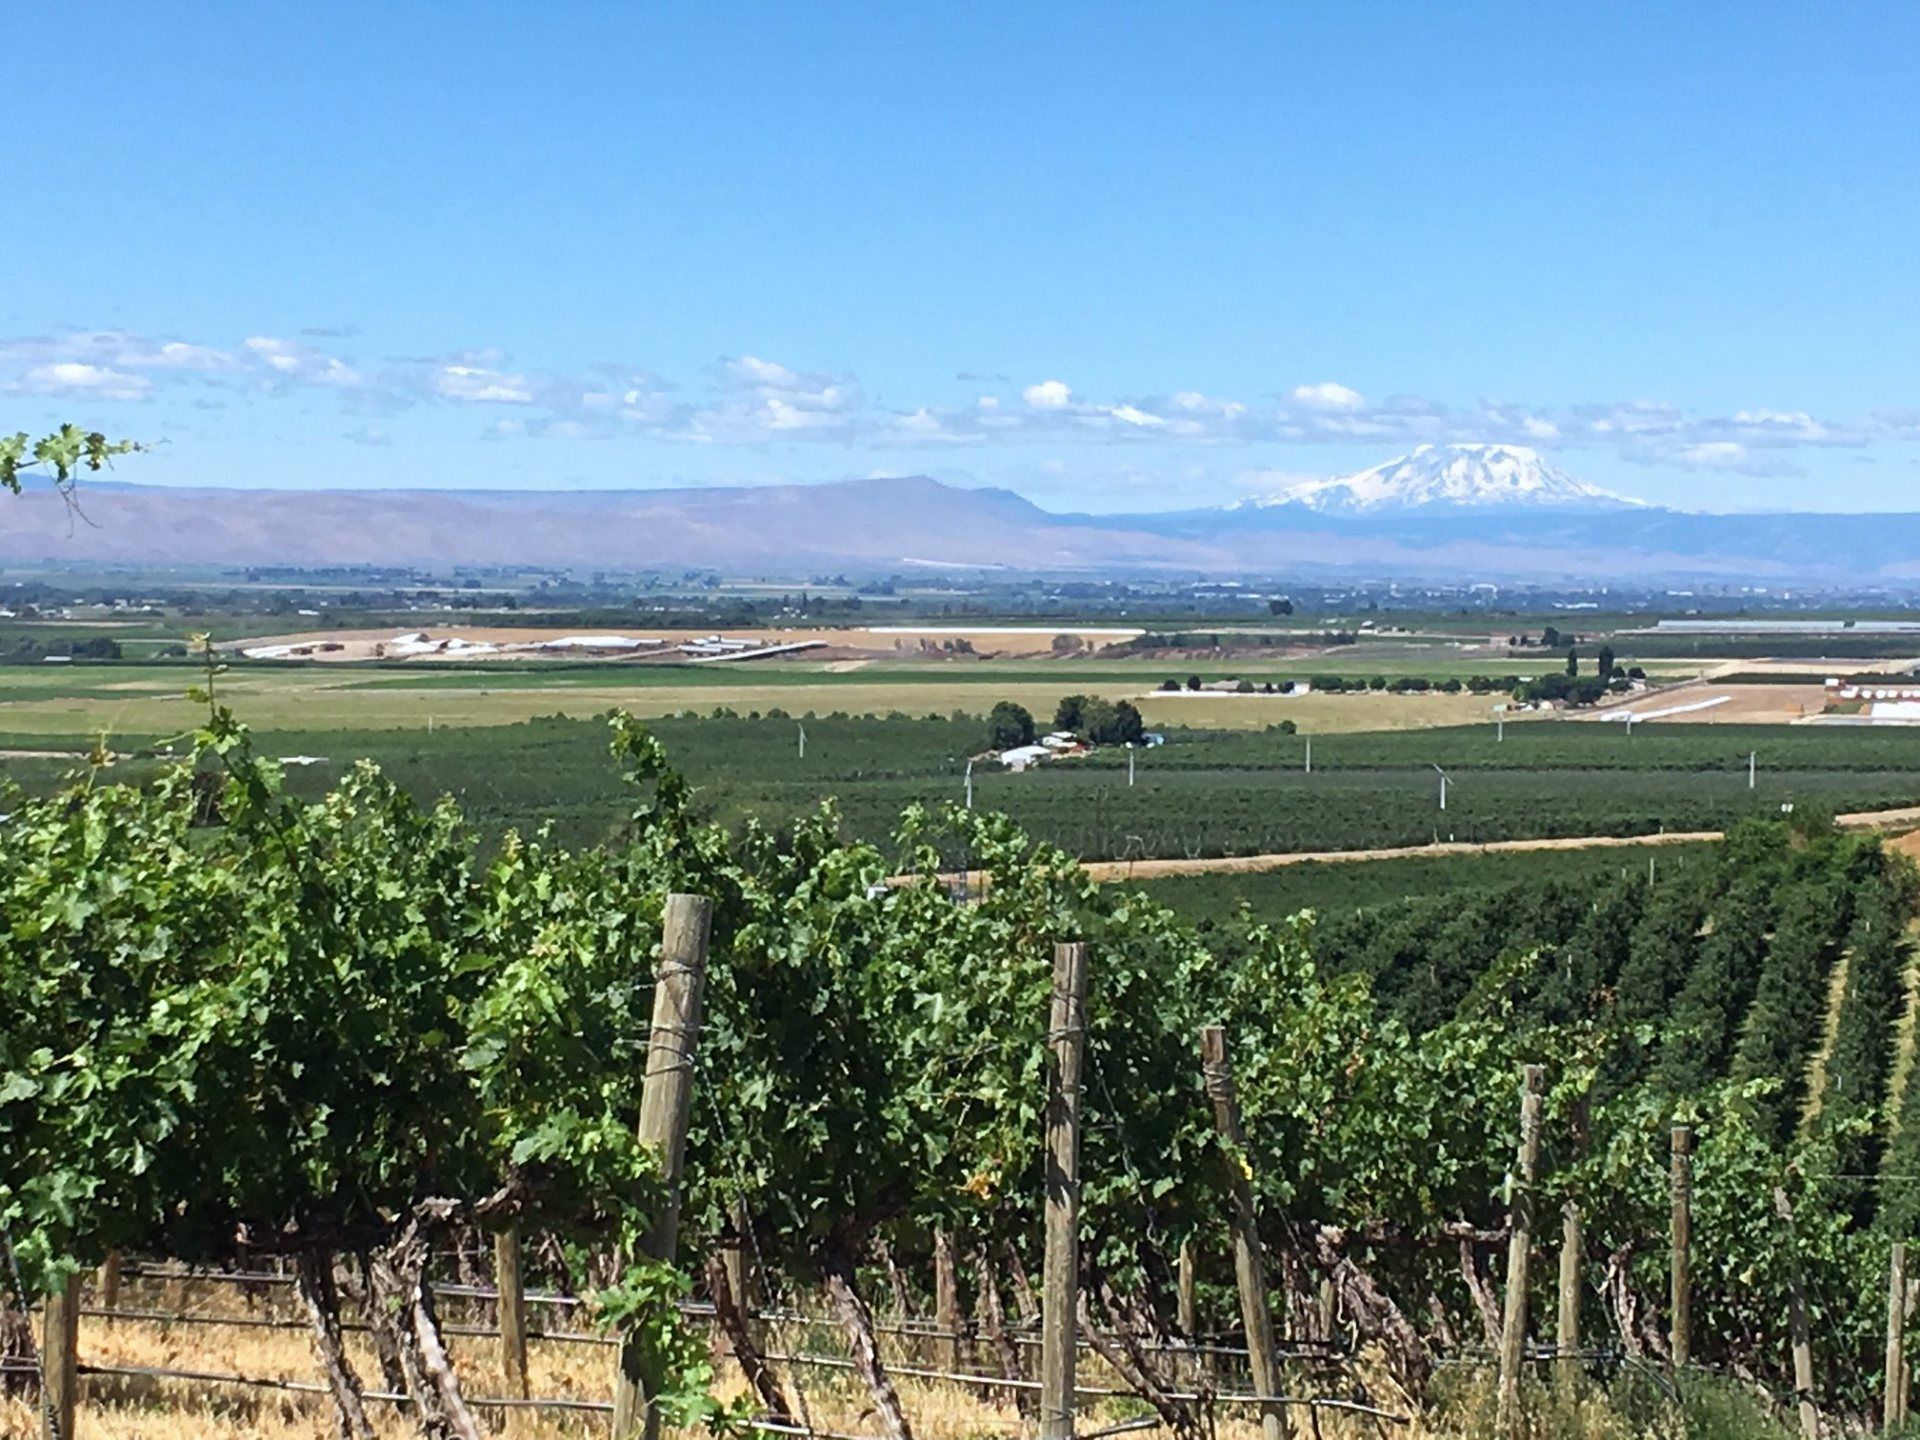 A sunny day in DuBrul Vineyard, looking out over the Yakima Valley